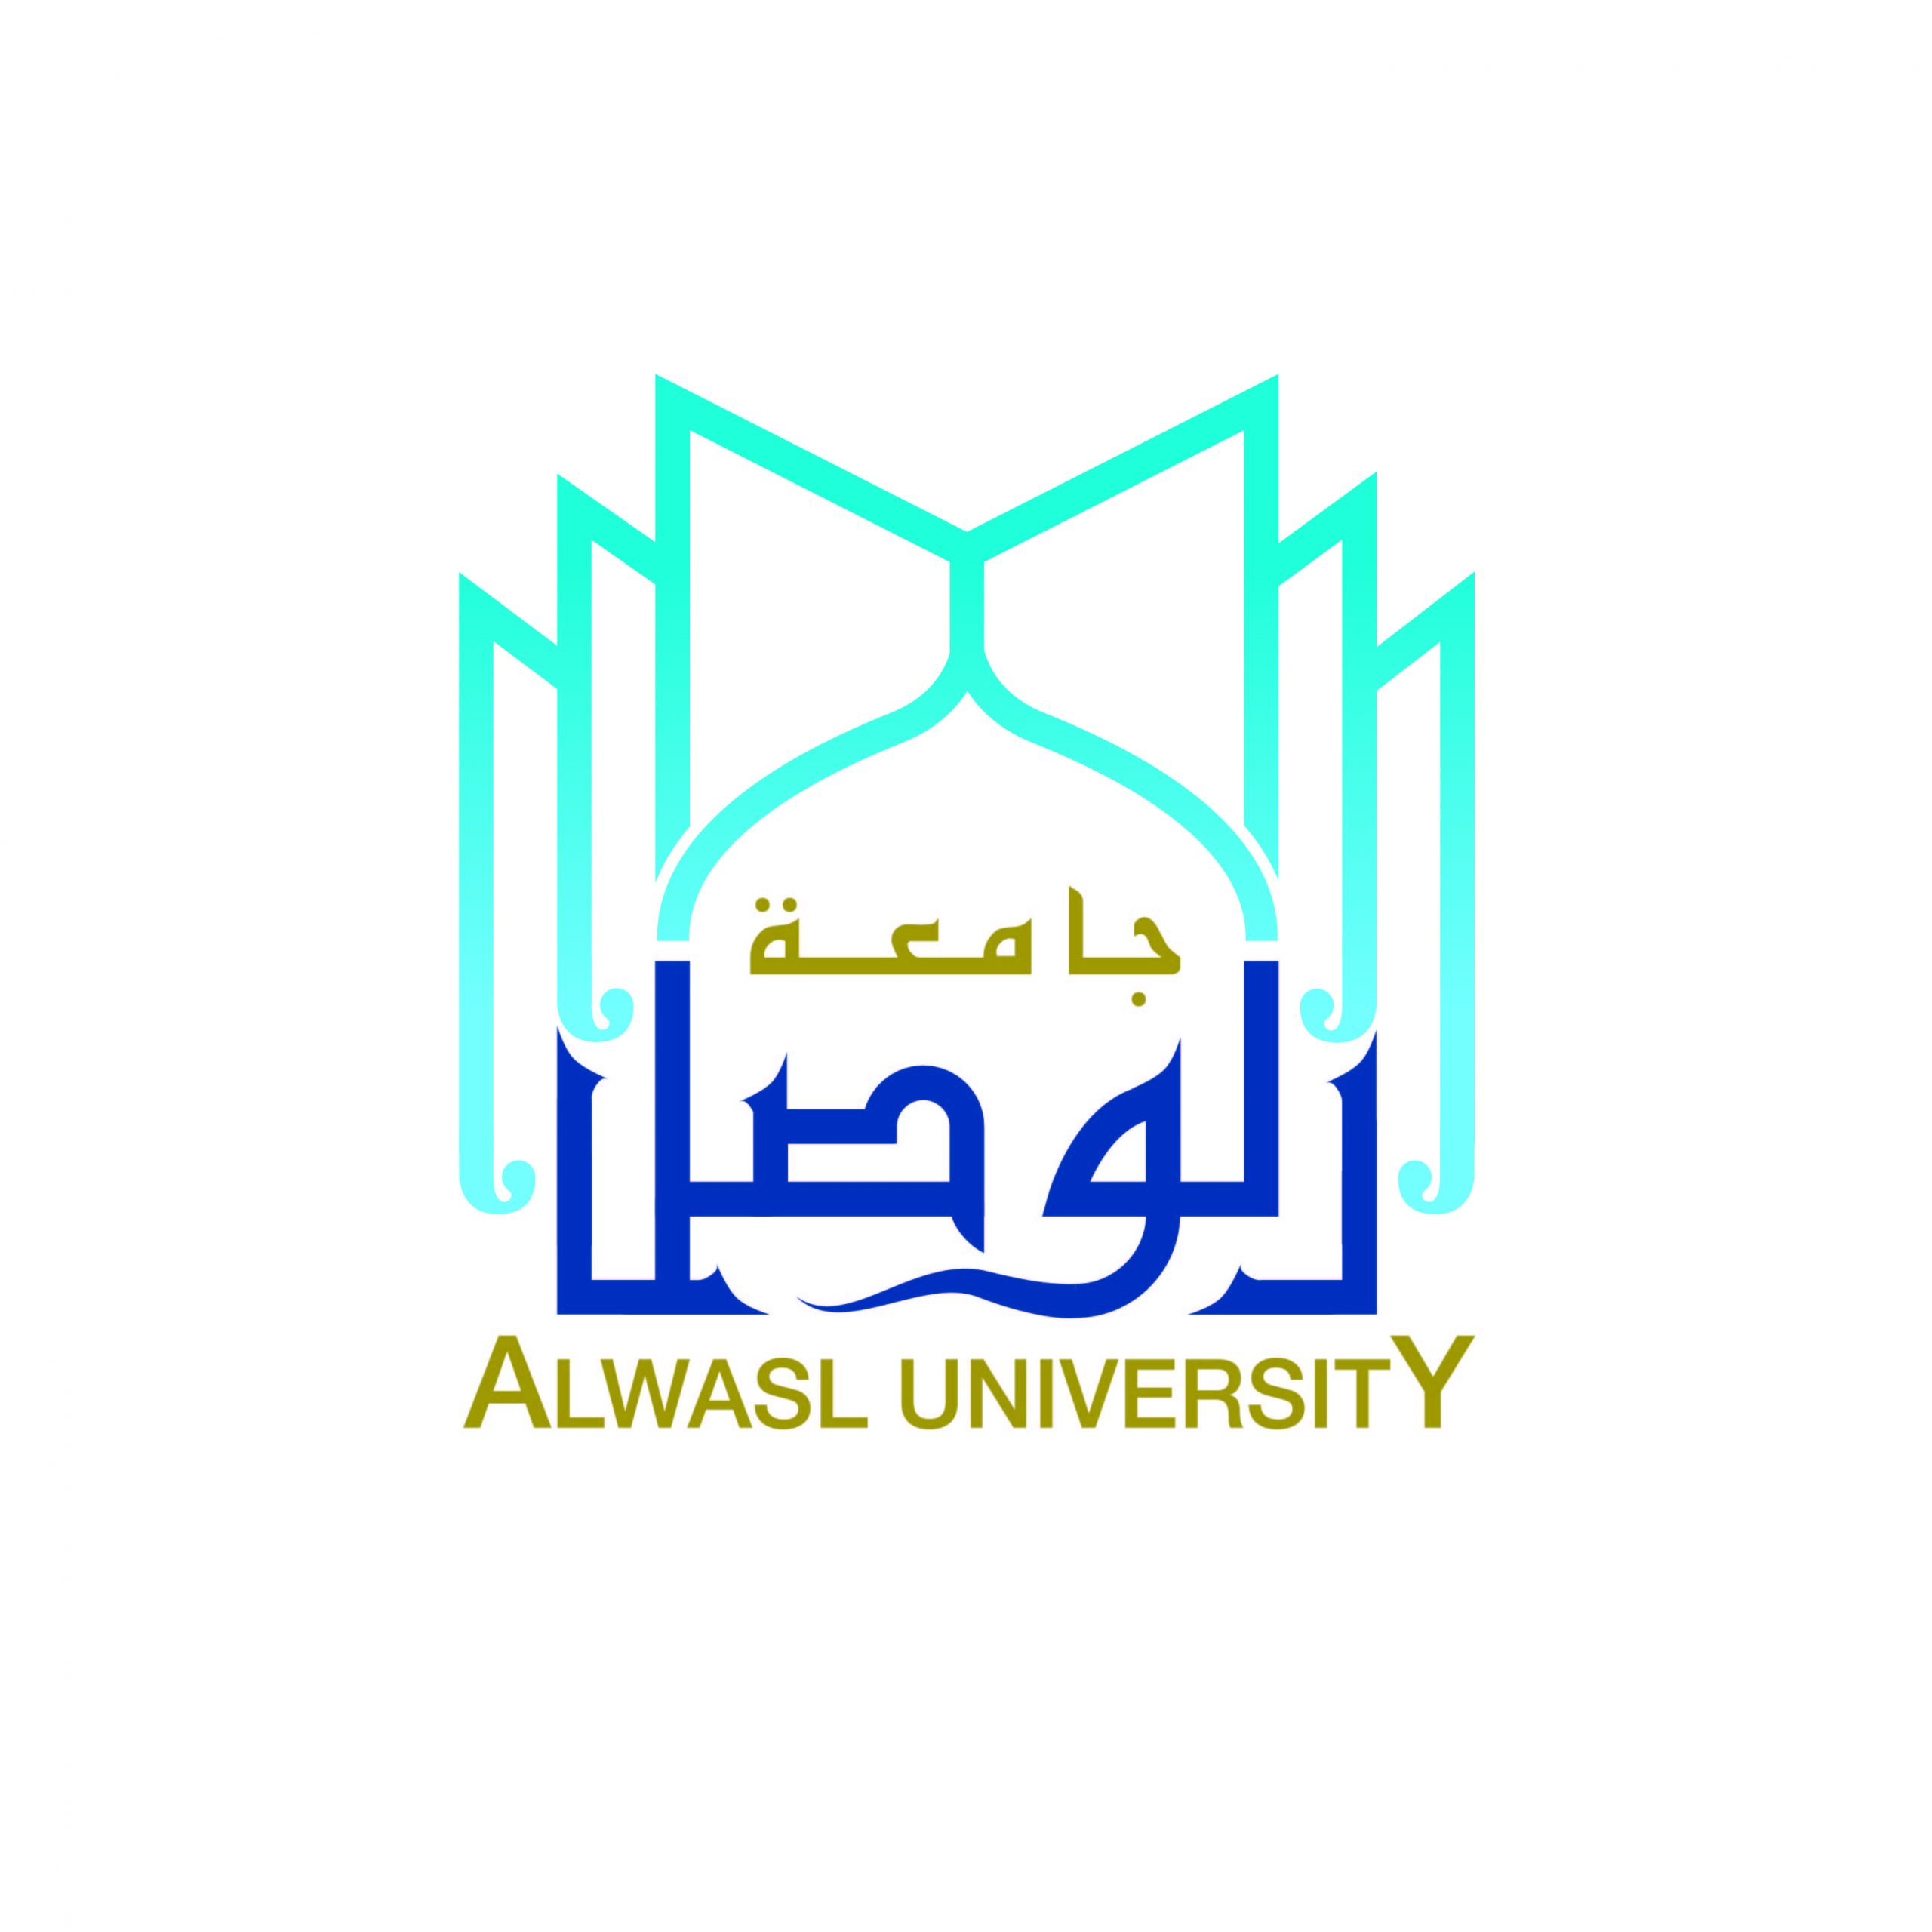 ALWASL UNIVERSITY_Mirza Final_Without Date